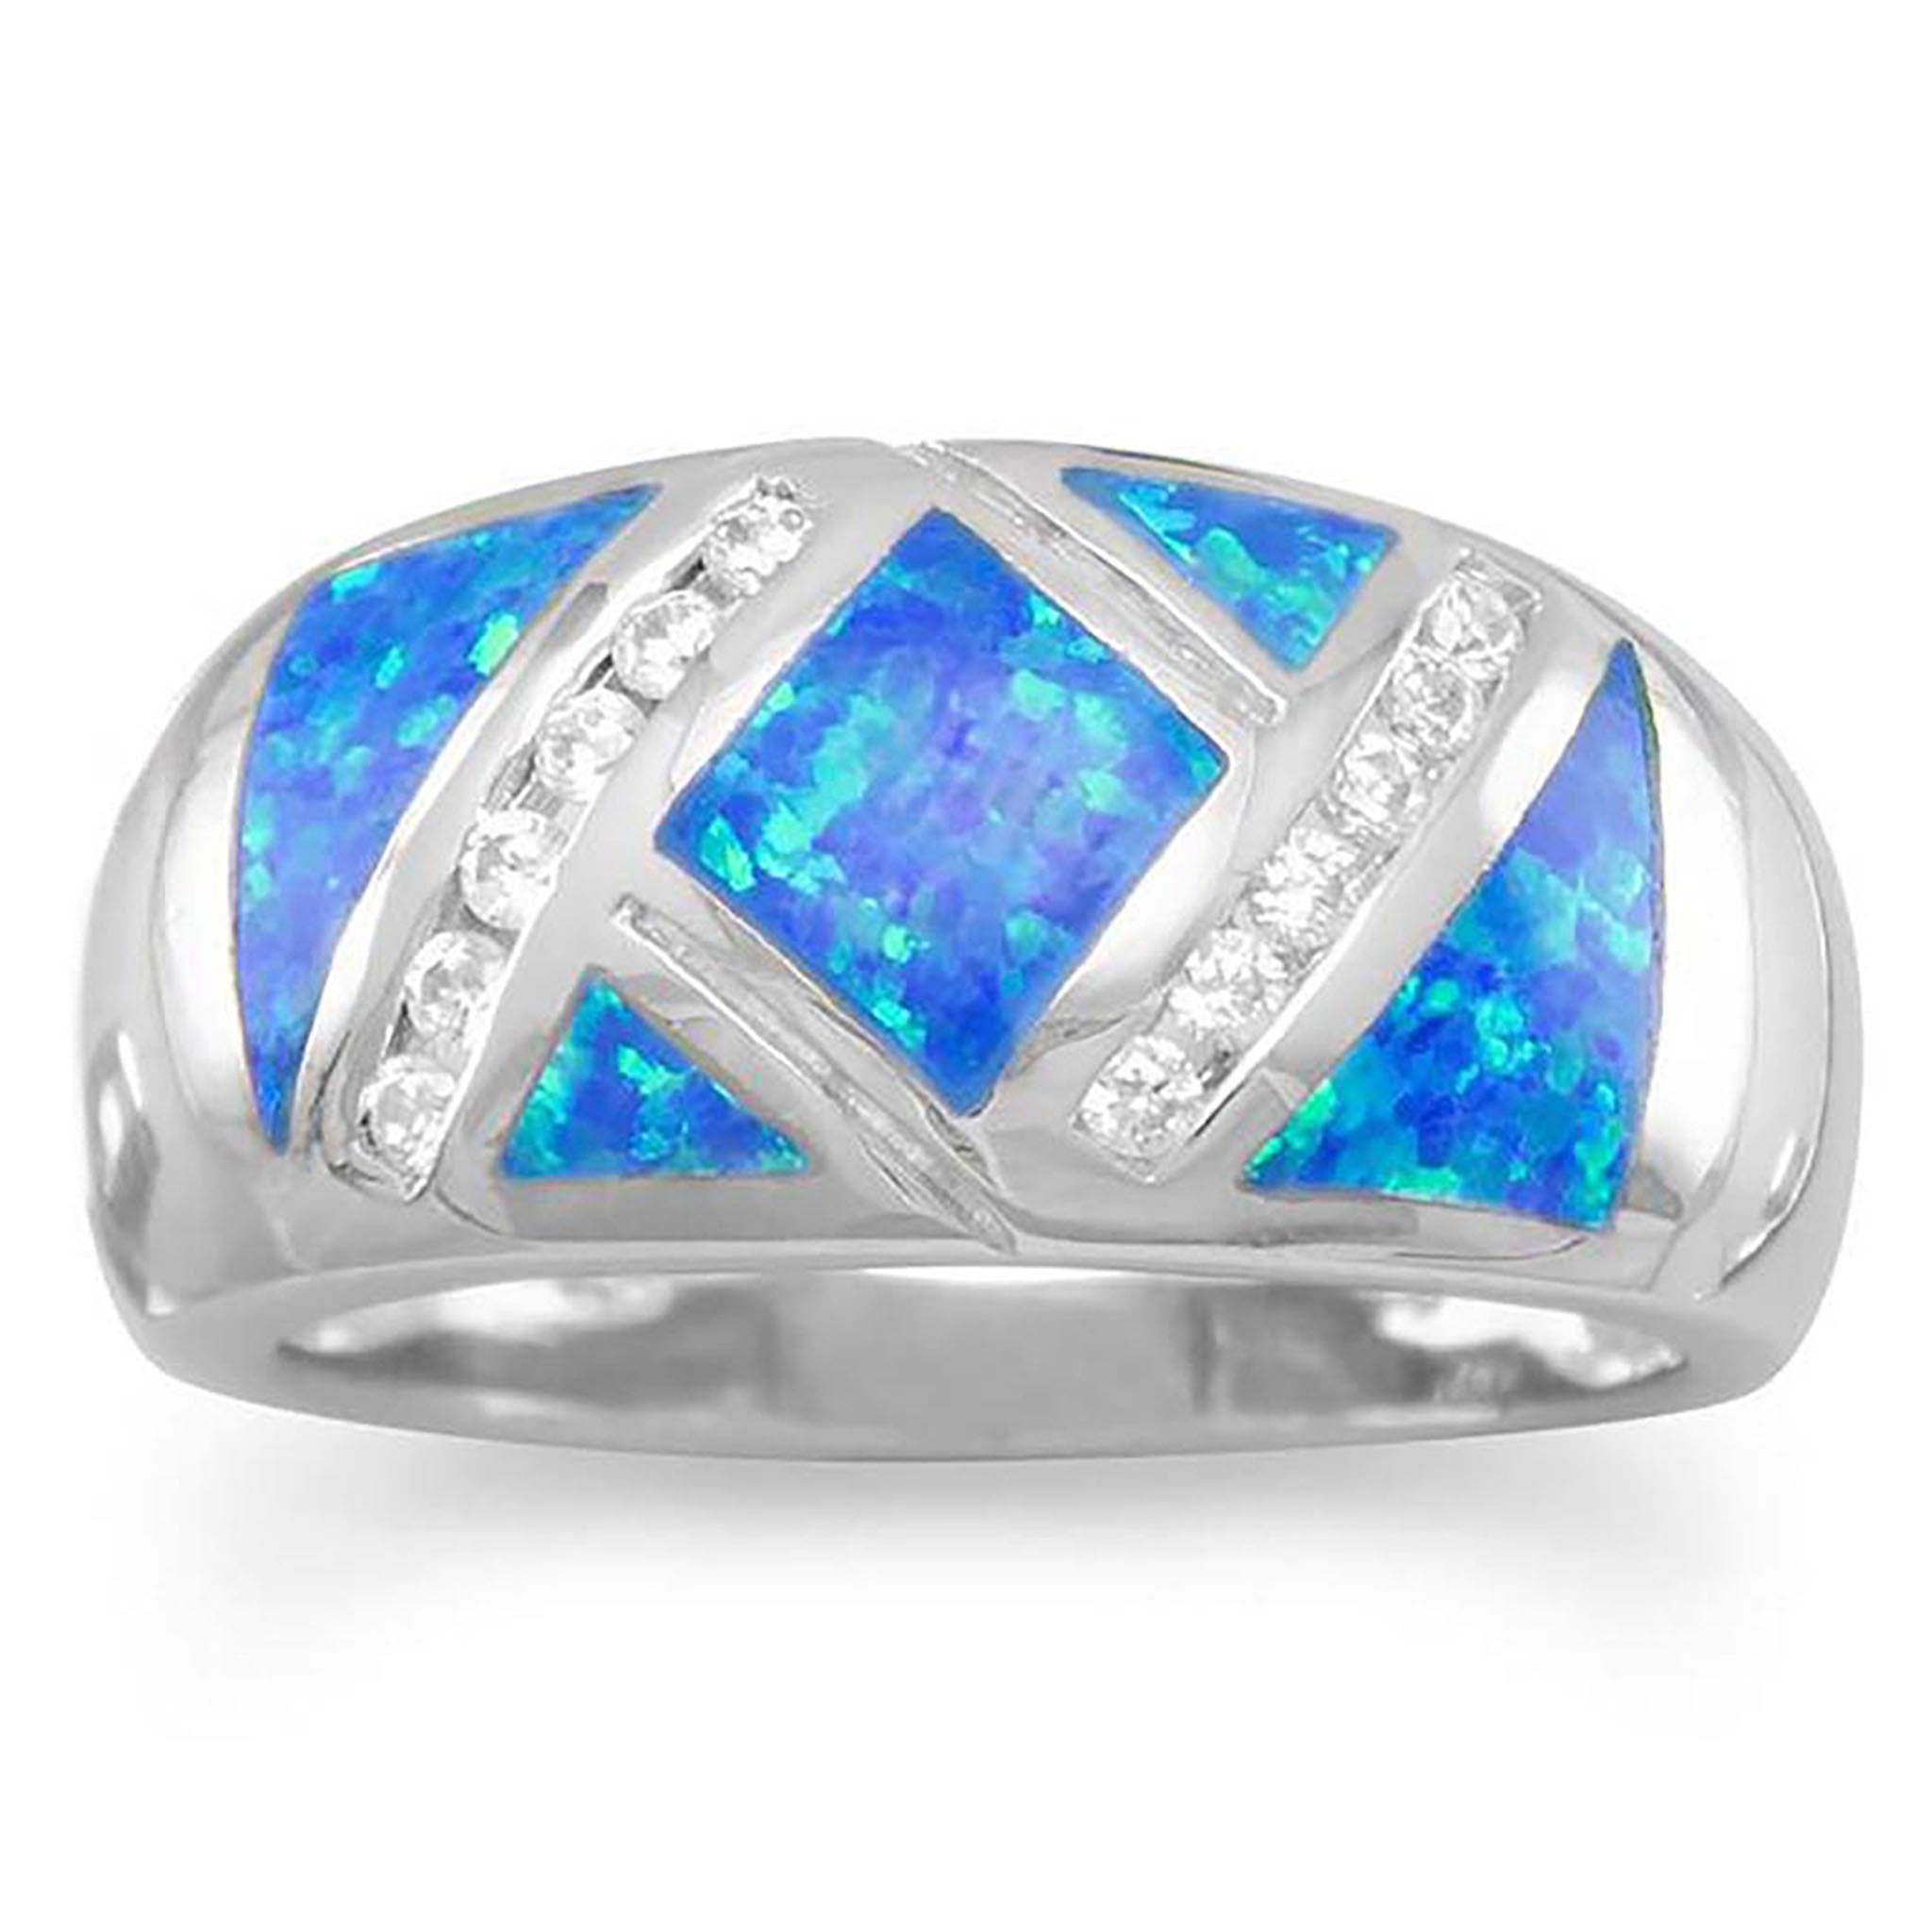 Blue Opal and Cubic Zirconia Ring